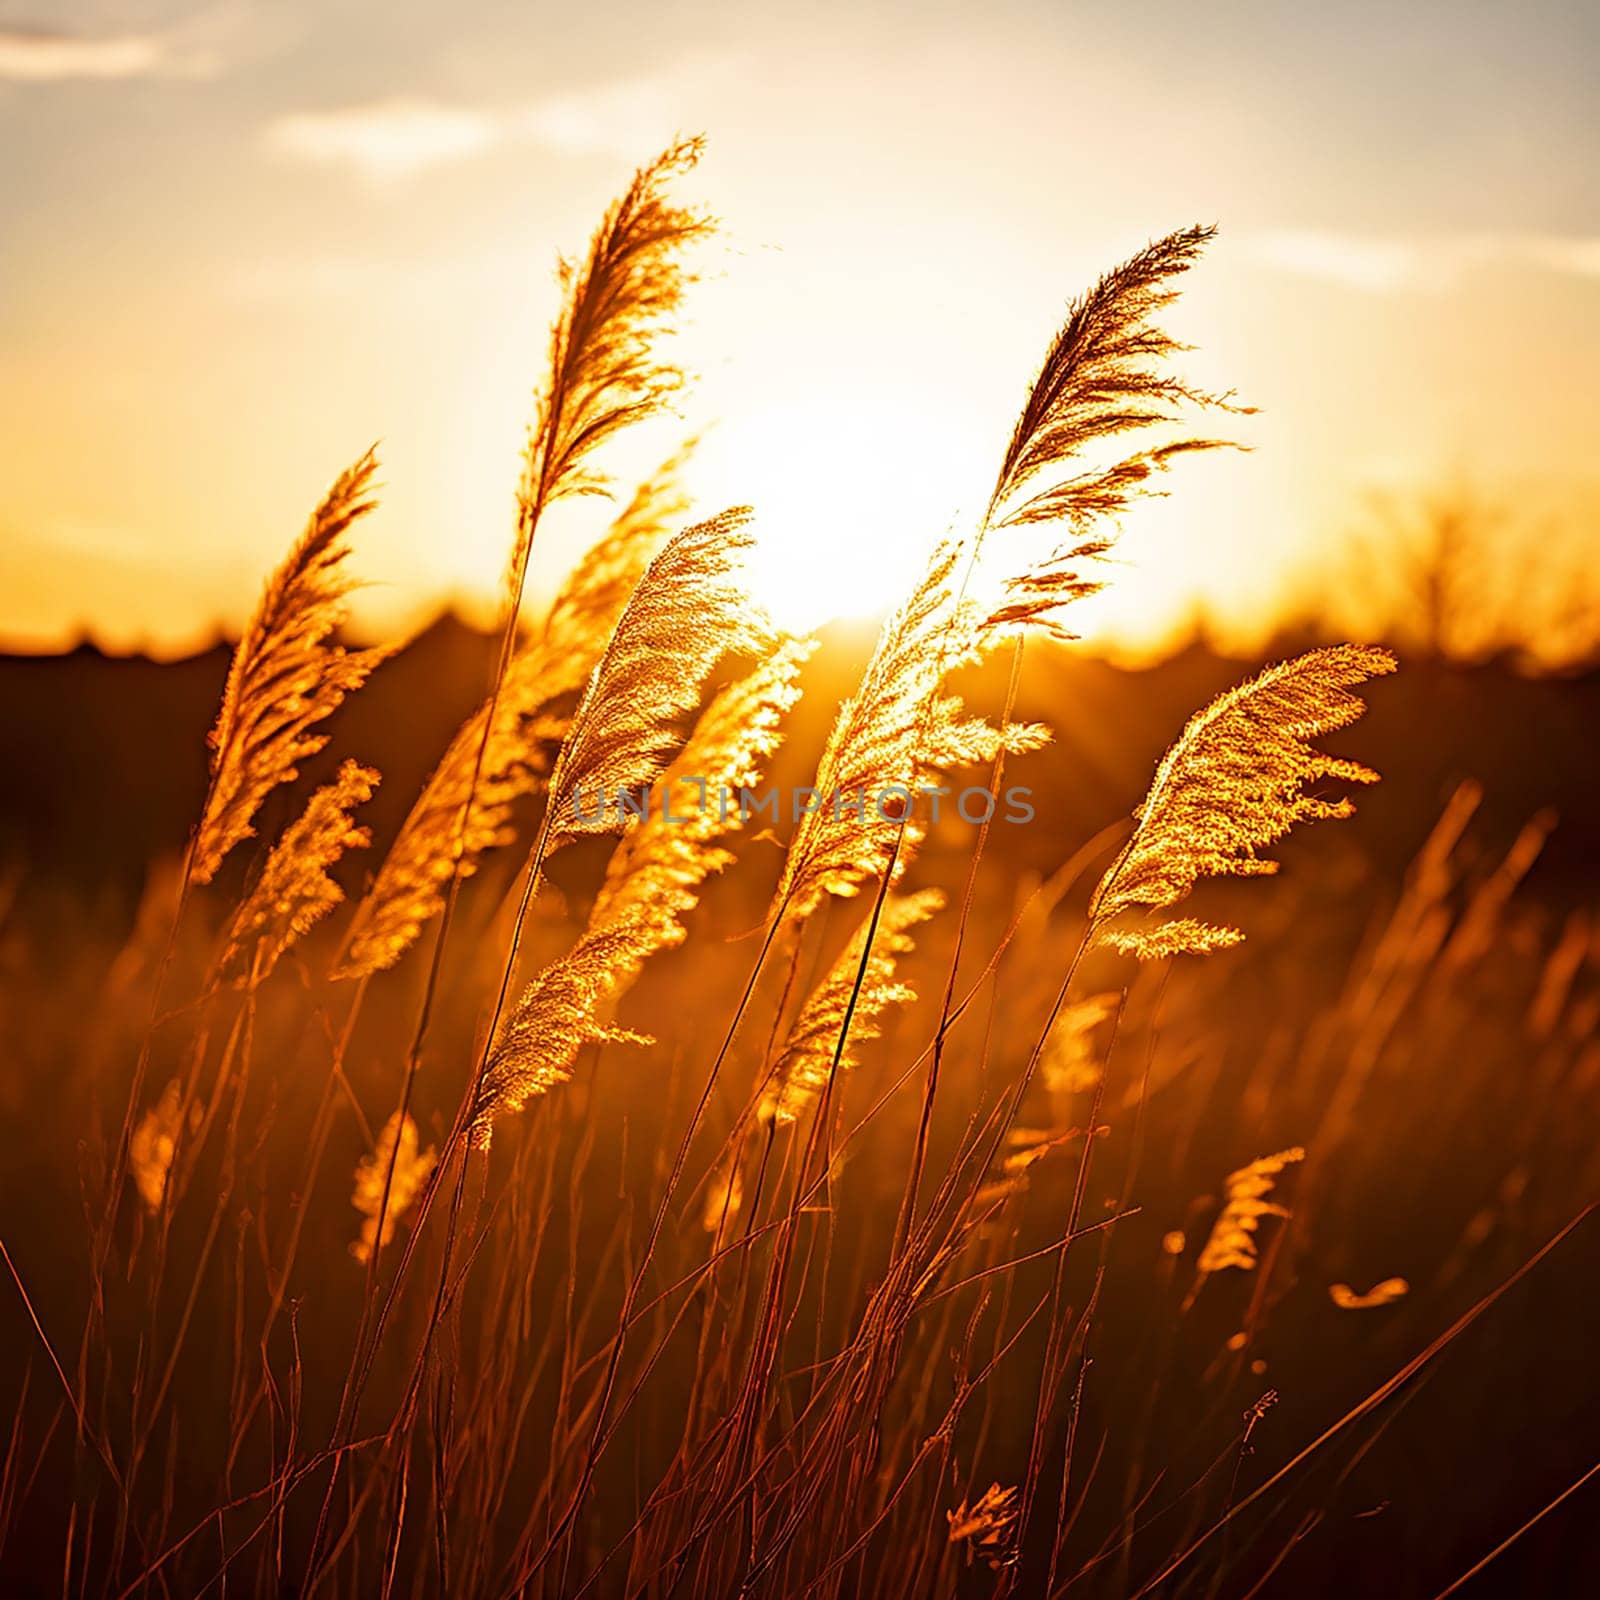 Nature's Dance: Wildgrass Swaying in the Gentle Sunlight by Petrichor